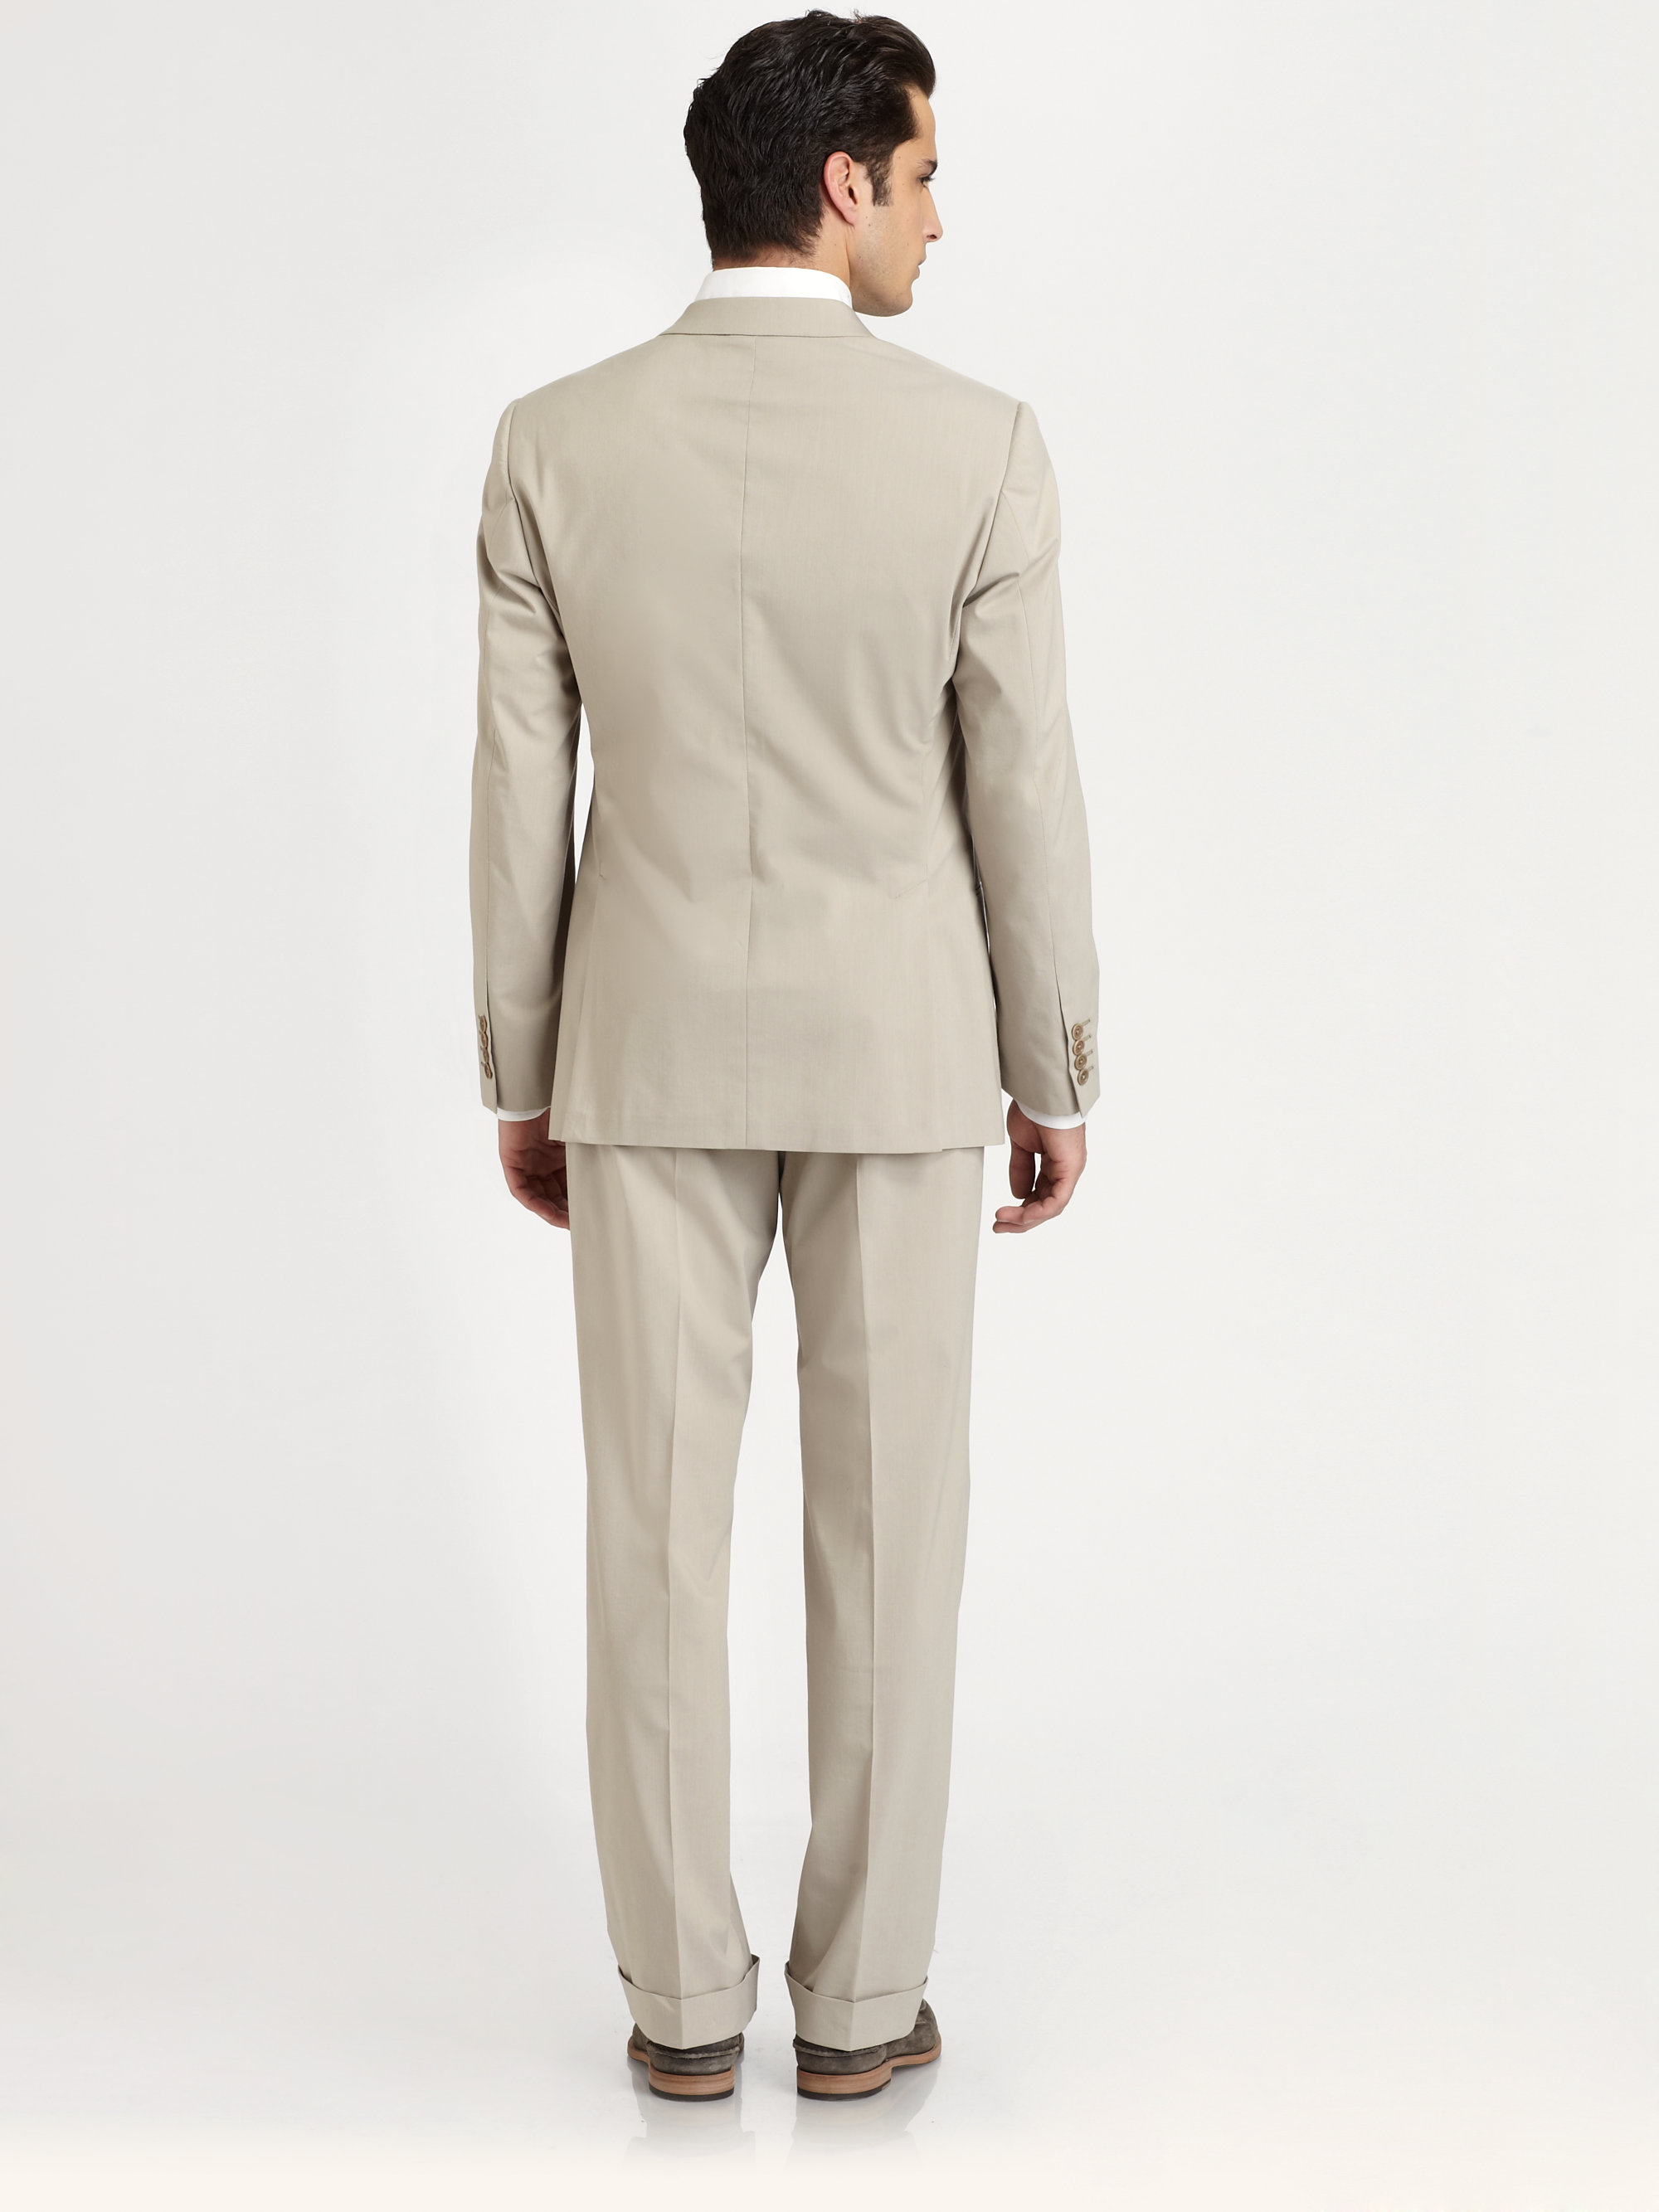 Armani Cotton Summer Suit in Natural for Men | Lyst